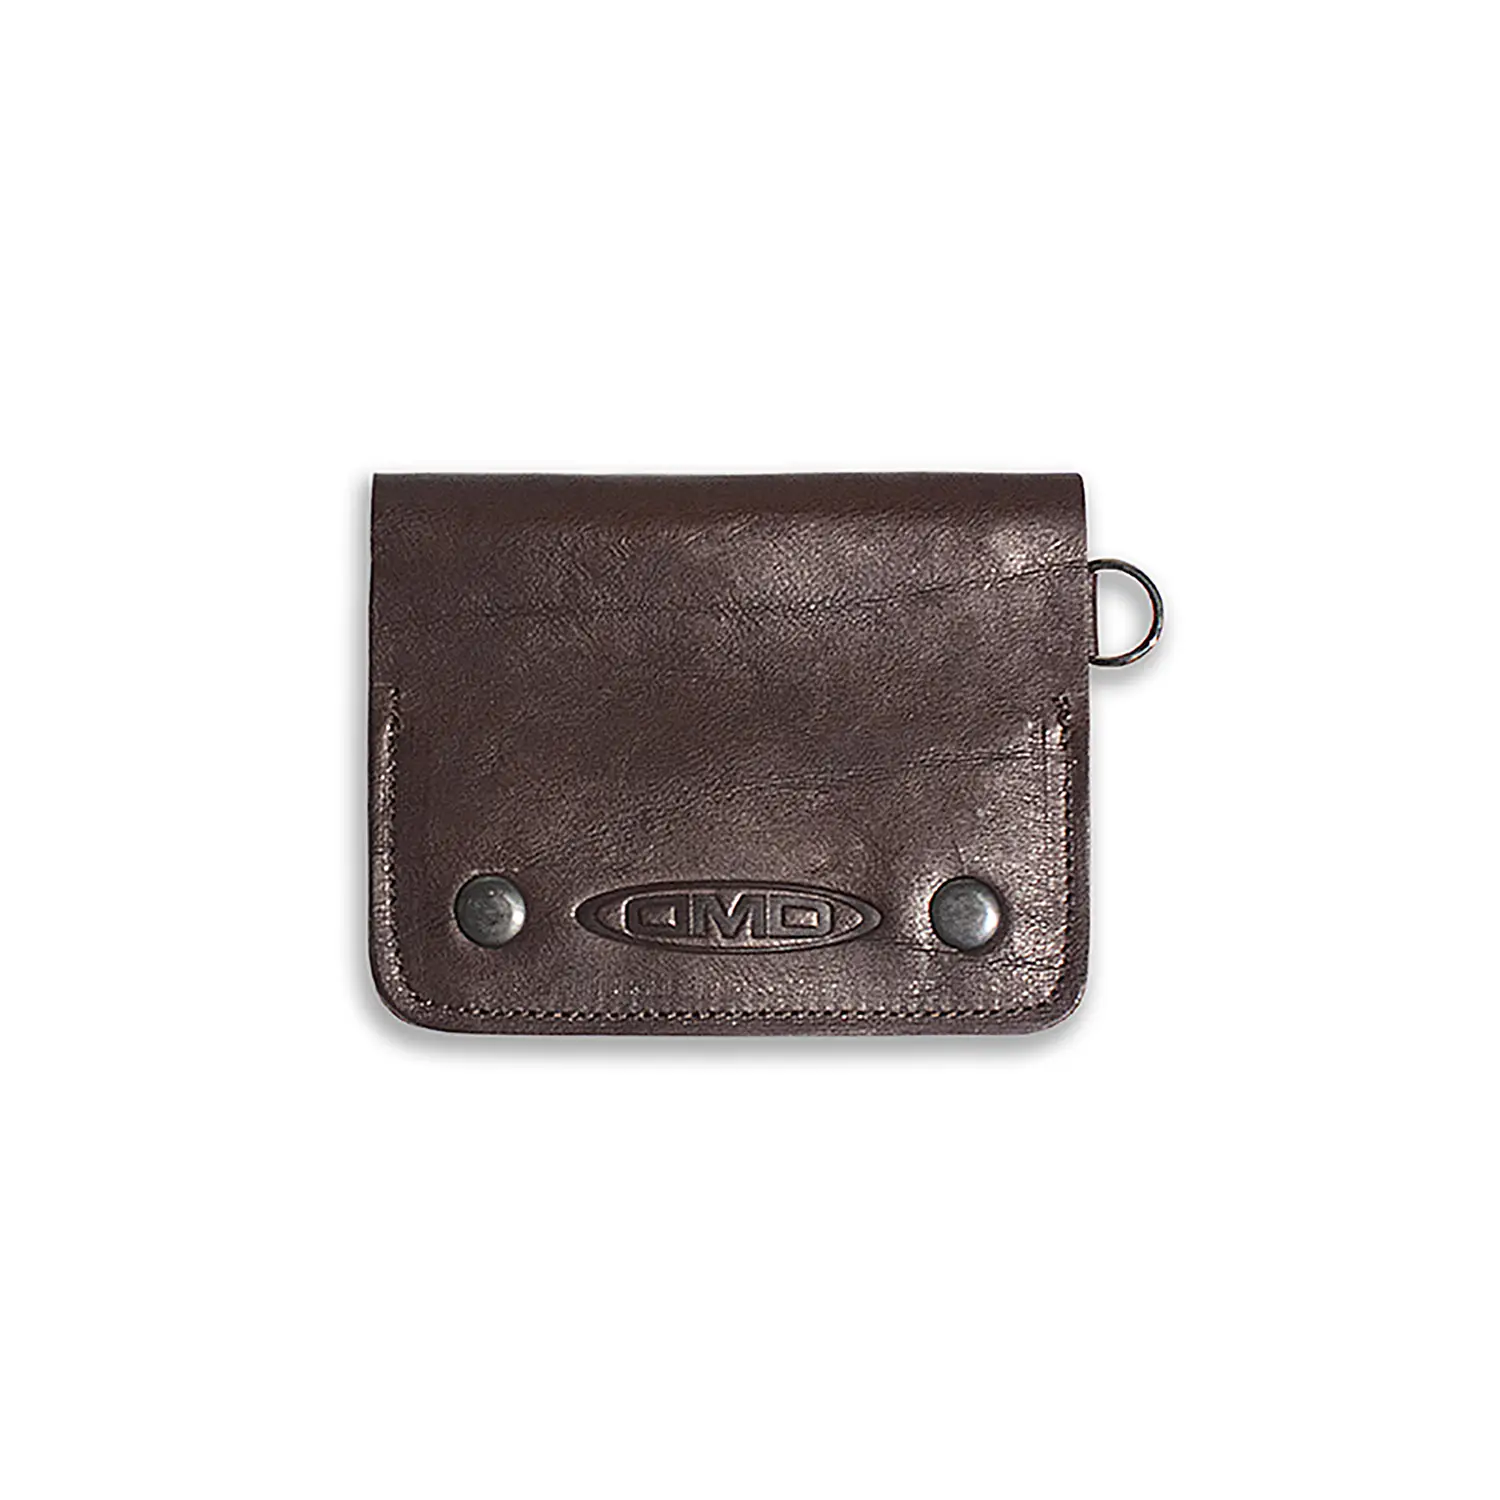 dmd.eu - WALLET WITH CHAIN RING